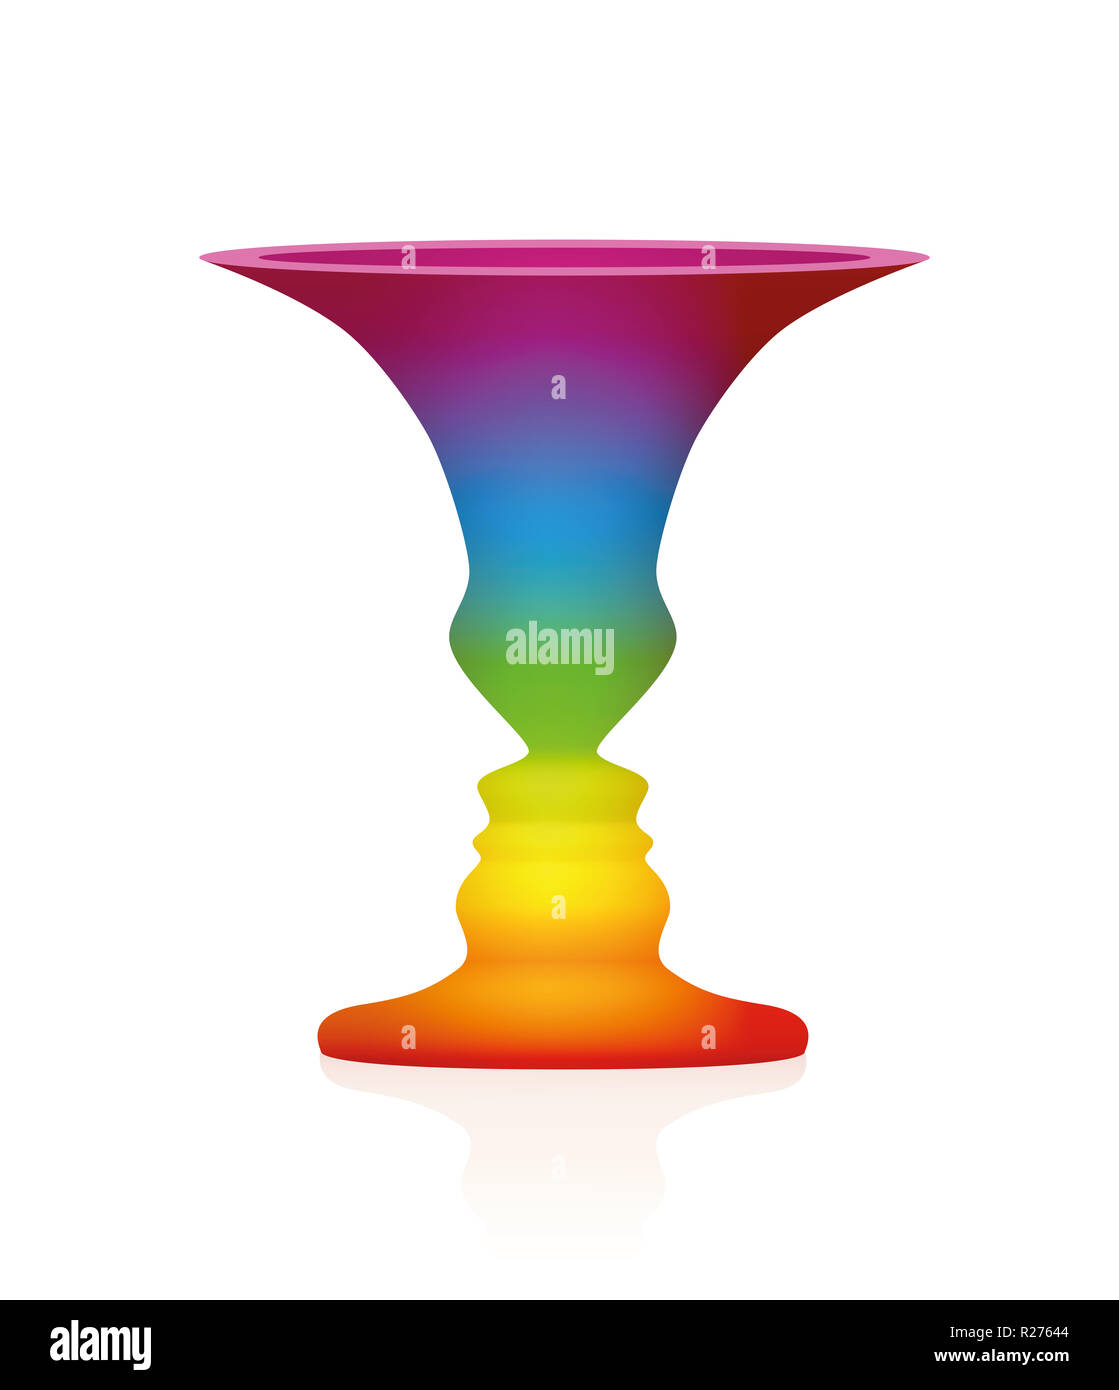 Optical illusion. Vase with two faces in profile. In psychology known as identifying figure from background. Rainbow colored three-dimensional vessel. Stock Photo